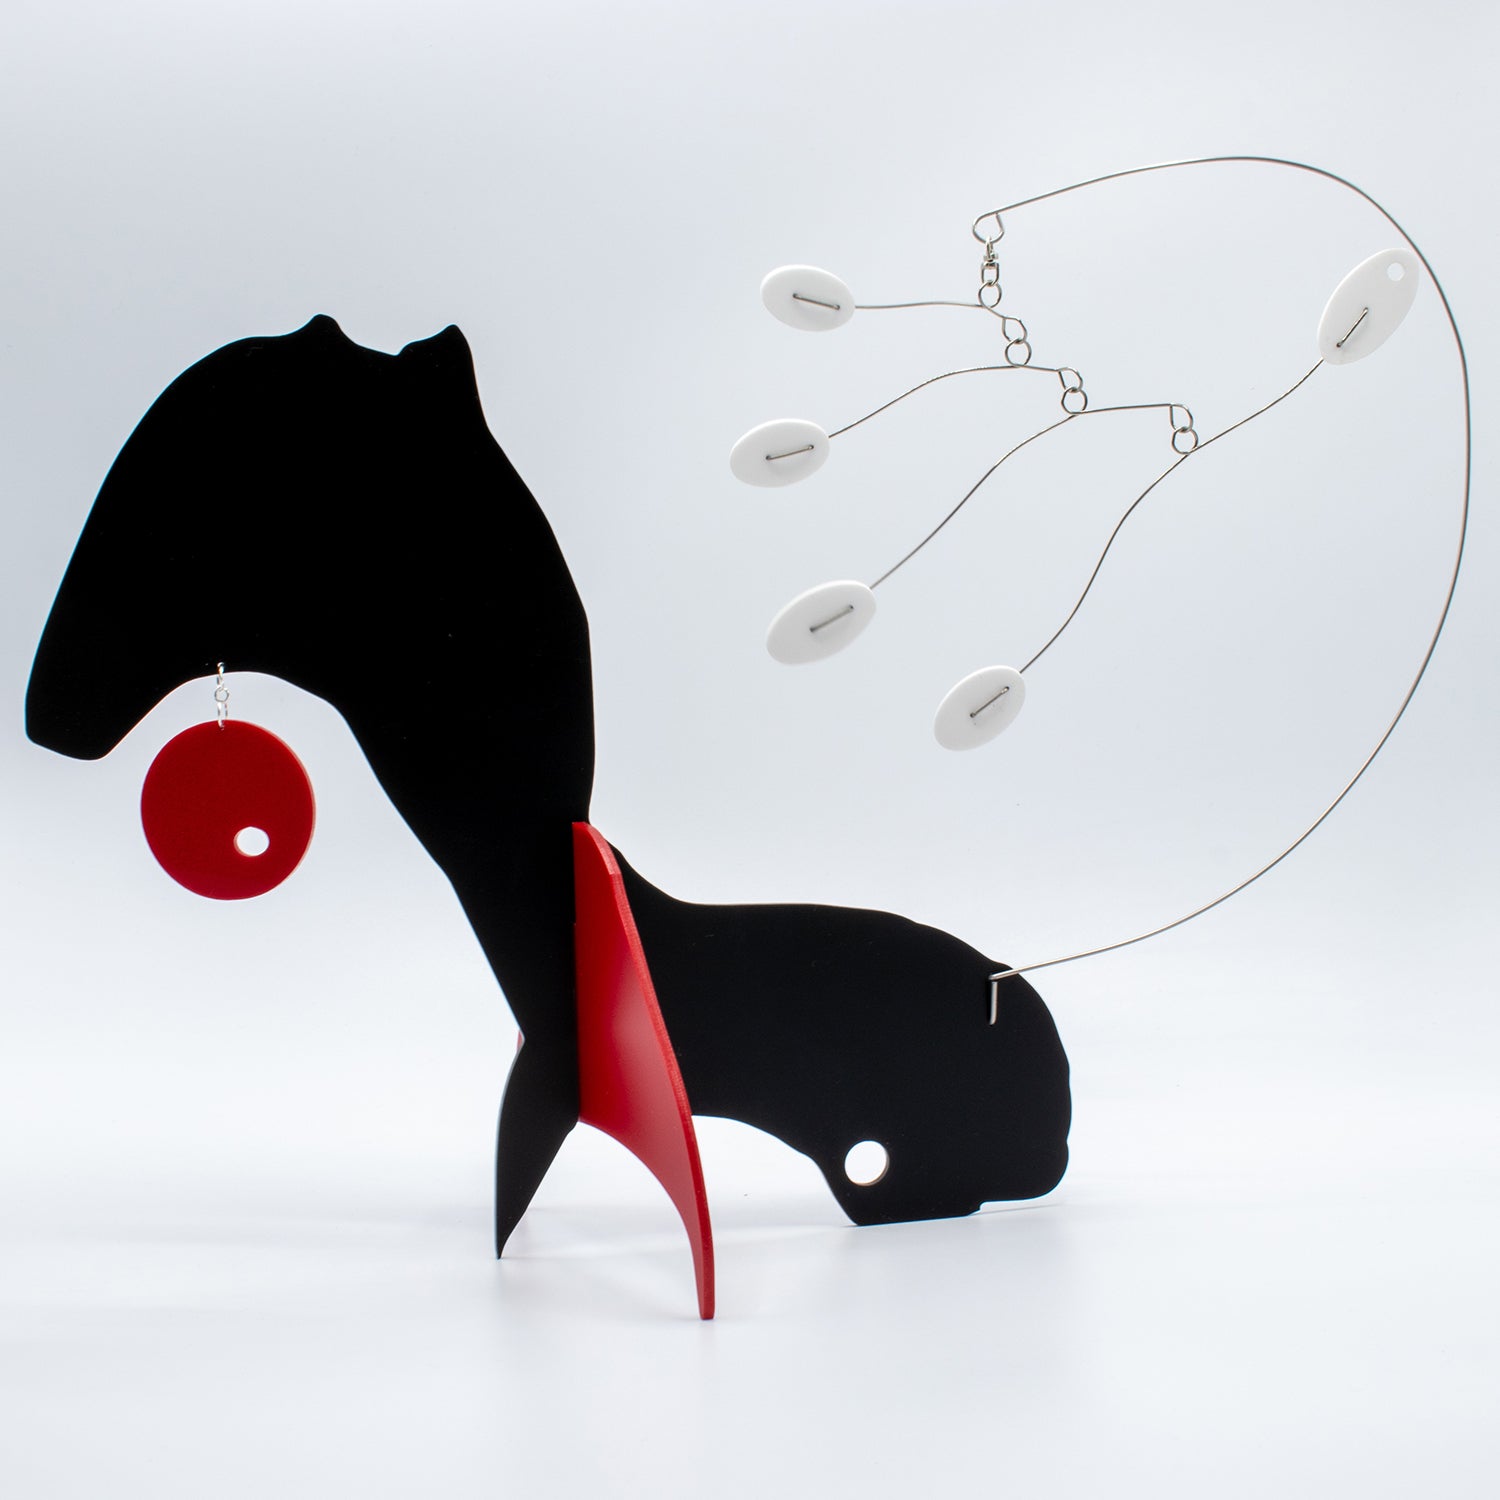 KinetiCats Collection Fox in Black, Red, and White - one of 12 Modern Cute Abstract Animal Art Sculpture Kinetic Stabiles inspired by Dada and mid century modern style art by AtomicMobiles.com